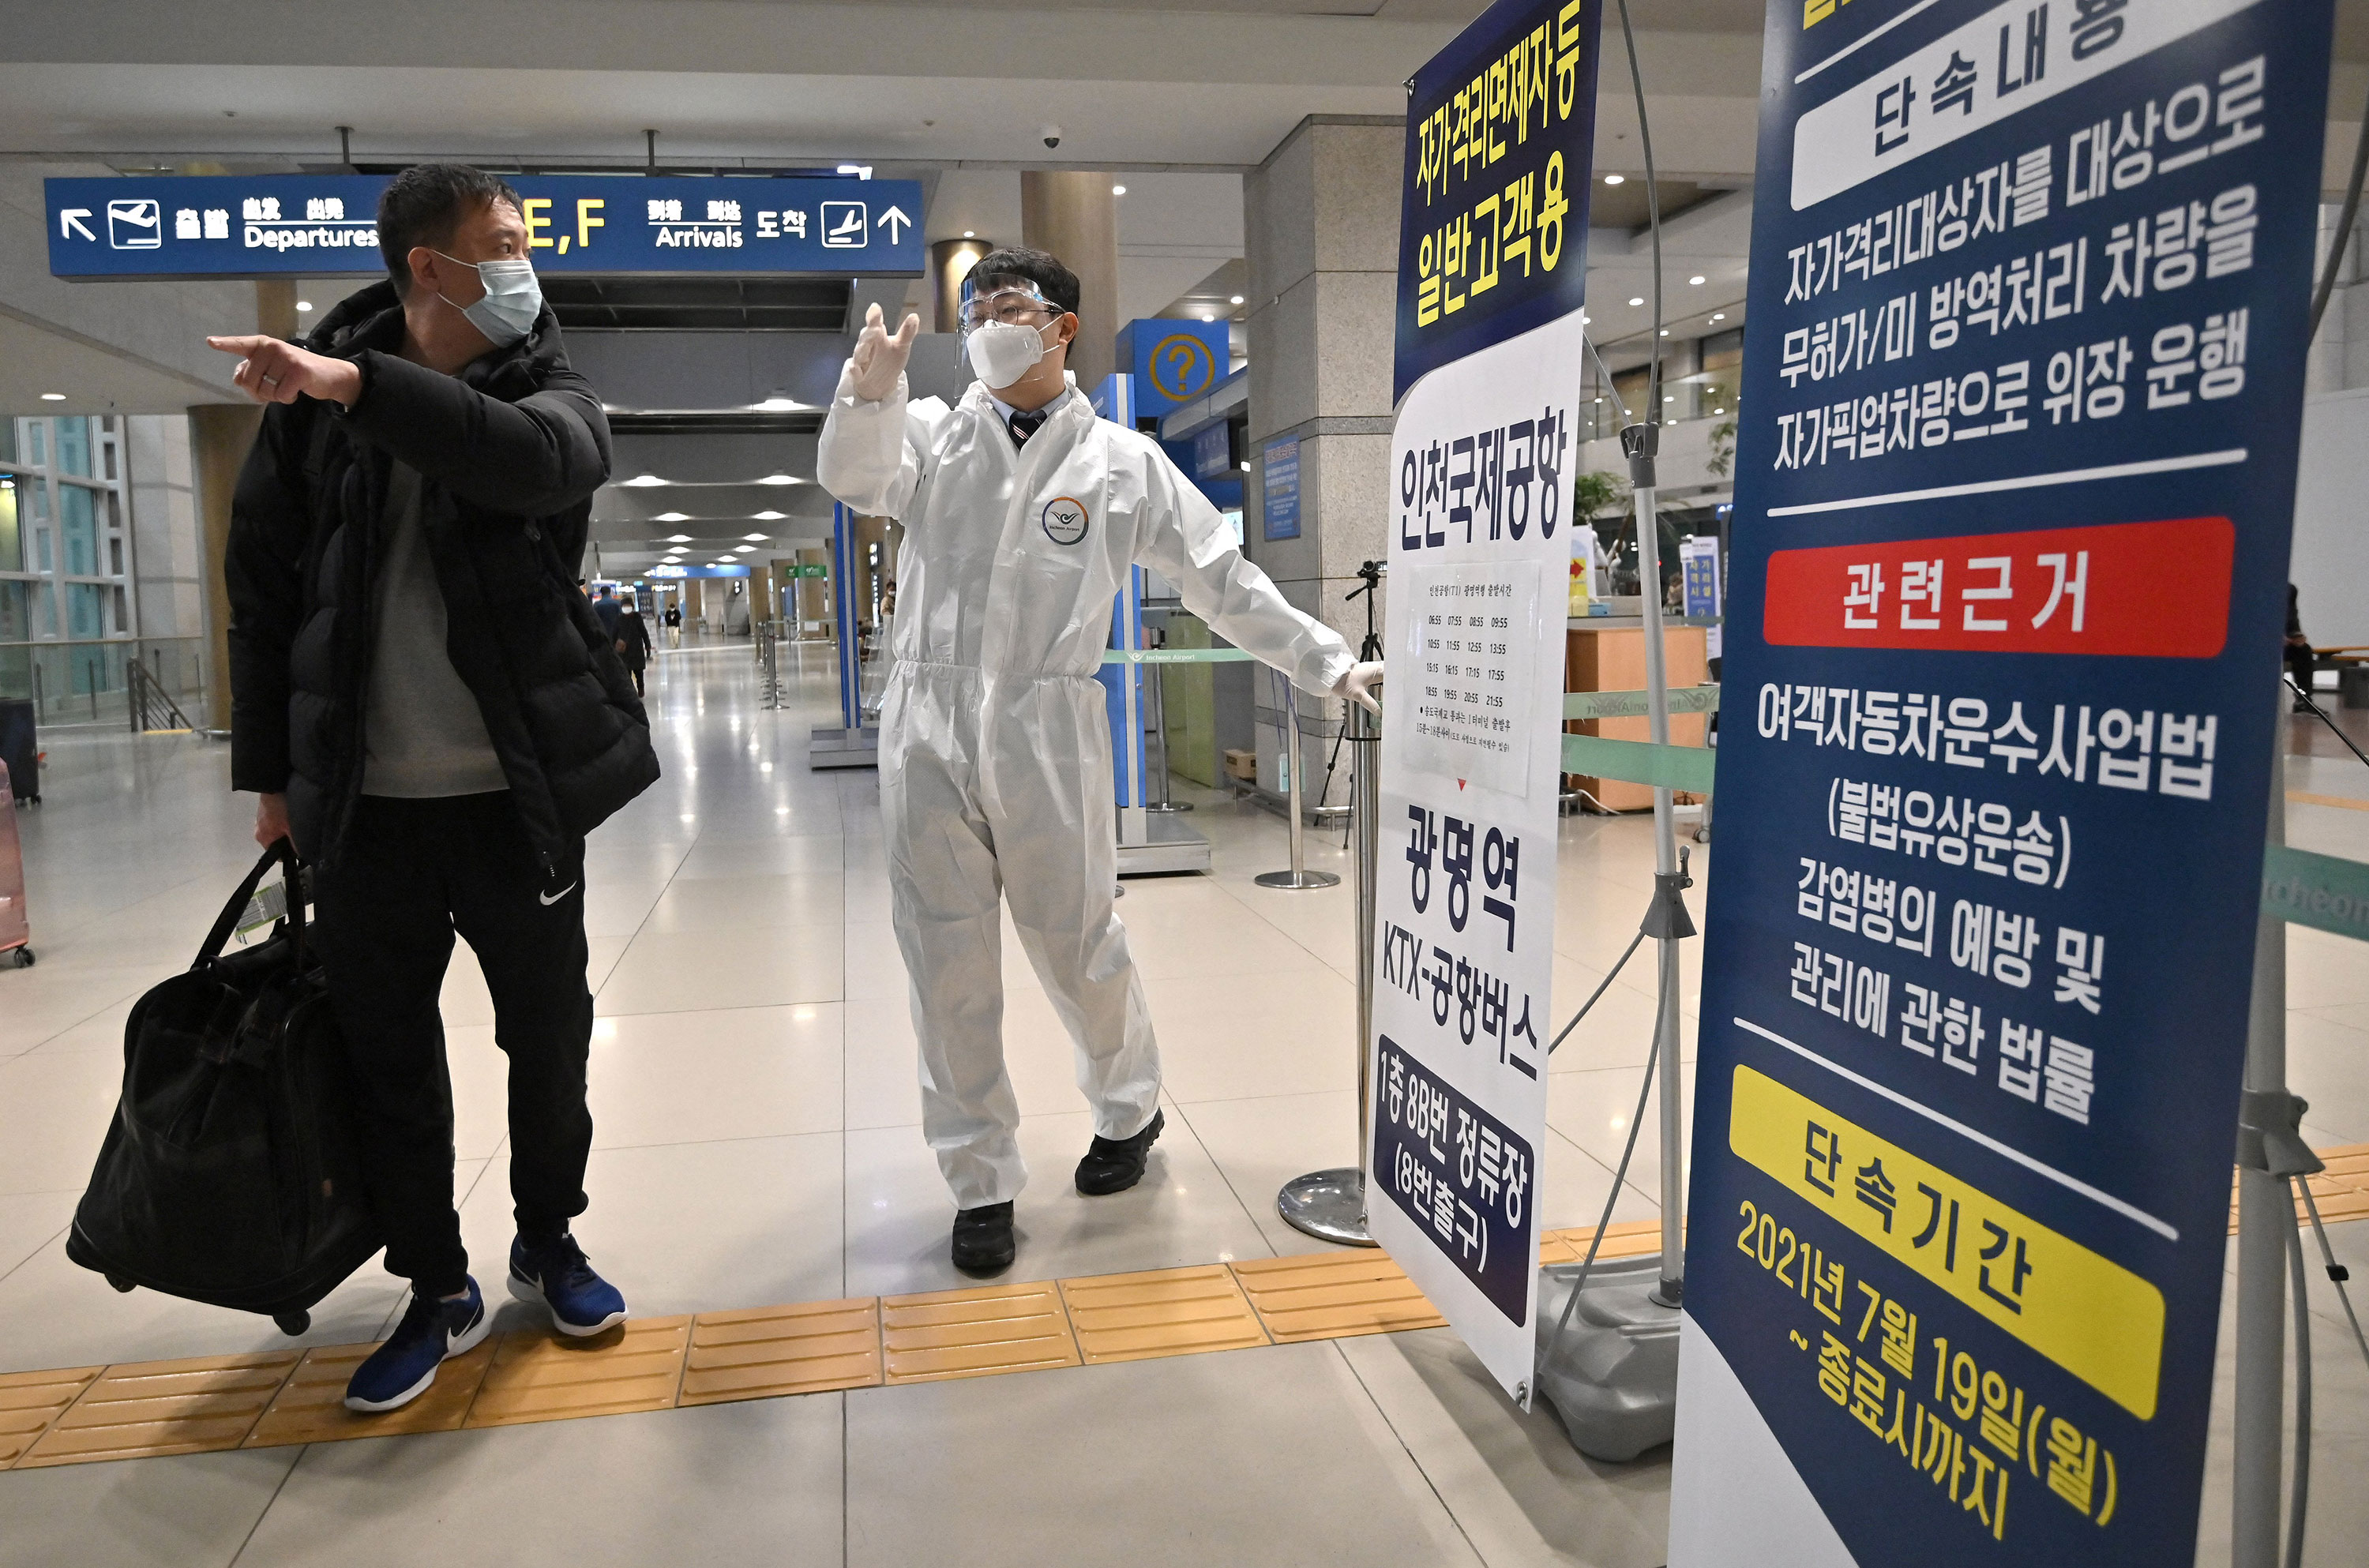 A staff member wearing protective equipment guides a traveller at the arrival hall of Incheon International Airport in Incheon, South Kora, on November 30.